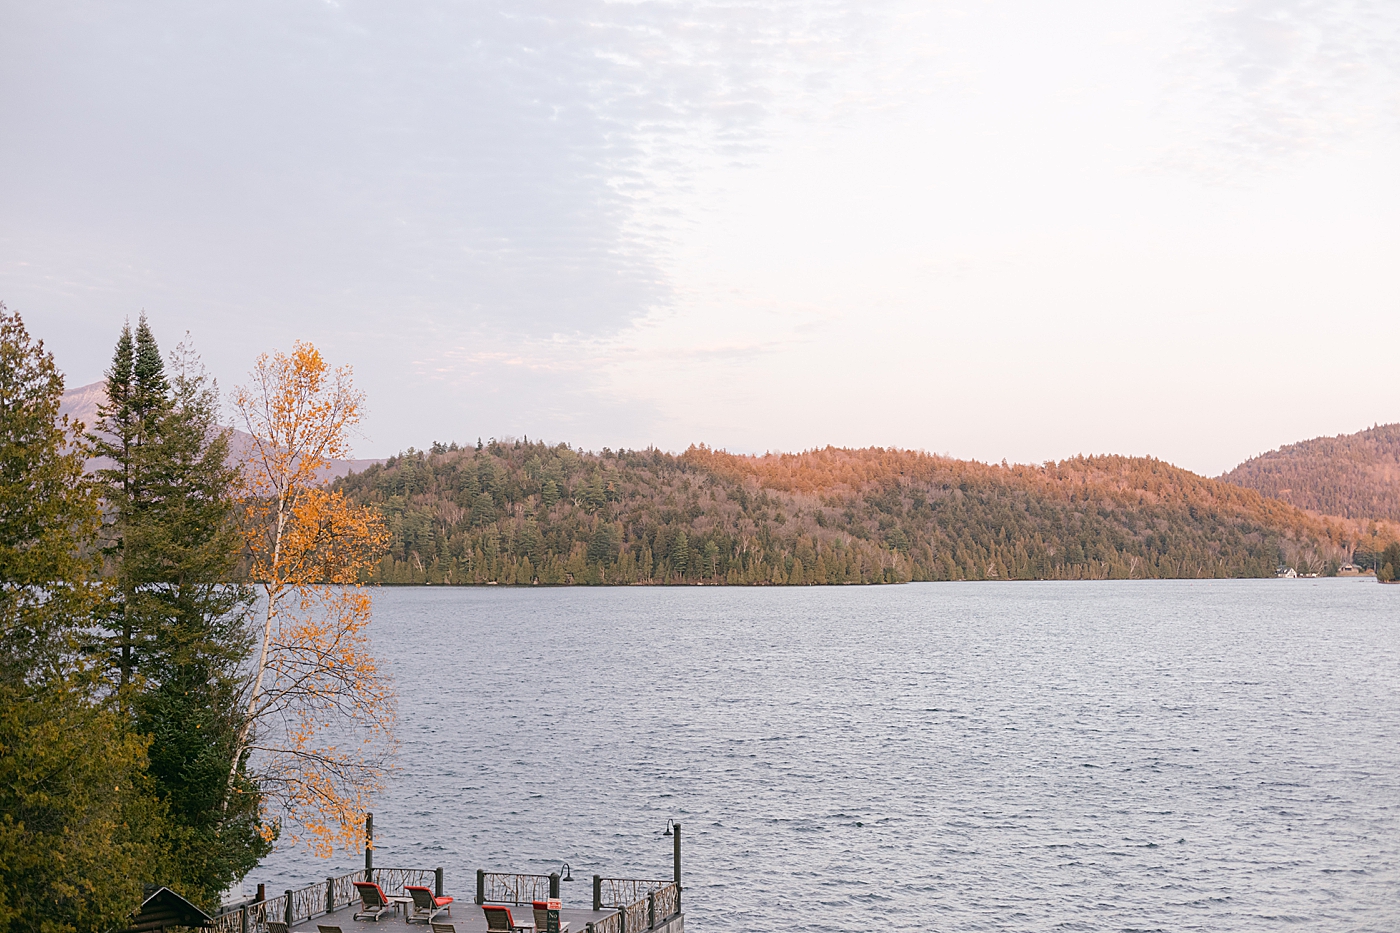 Lake Placid at sunset | Image by Hope Helmuth Photography